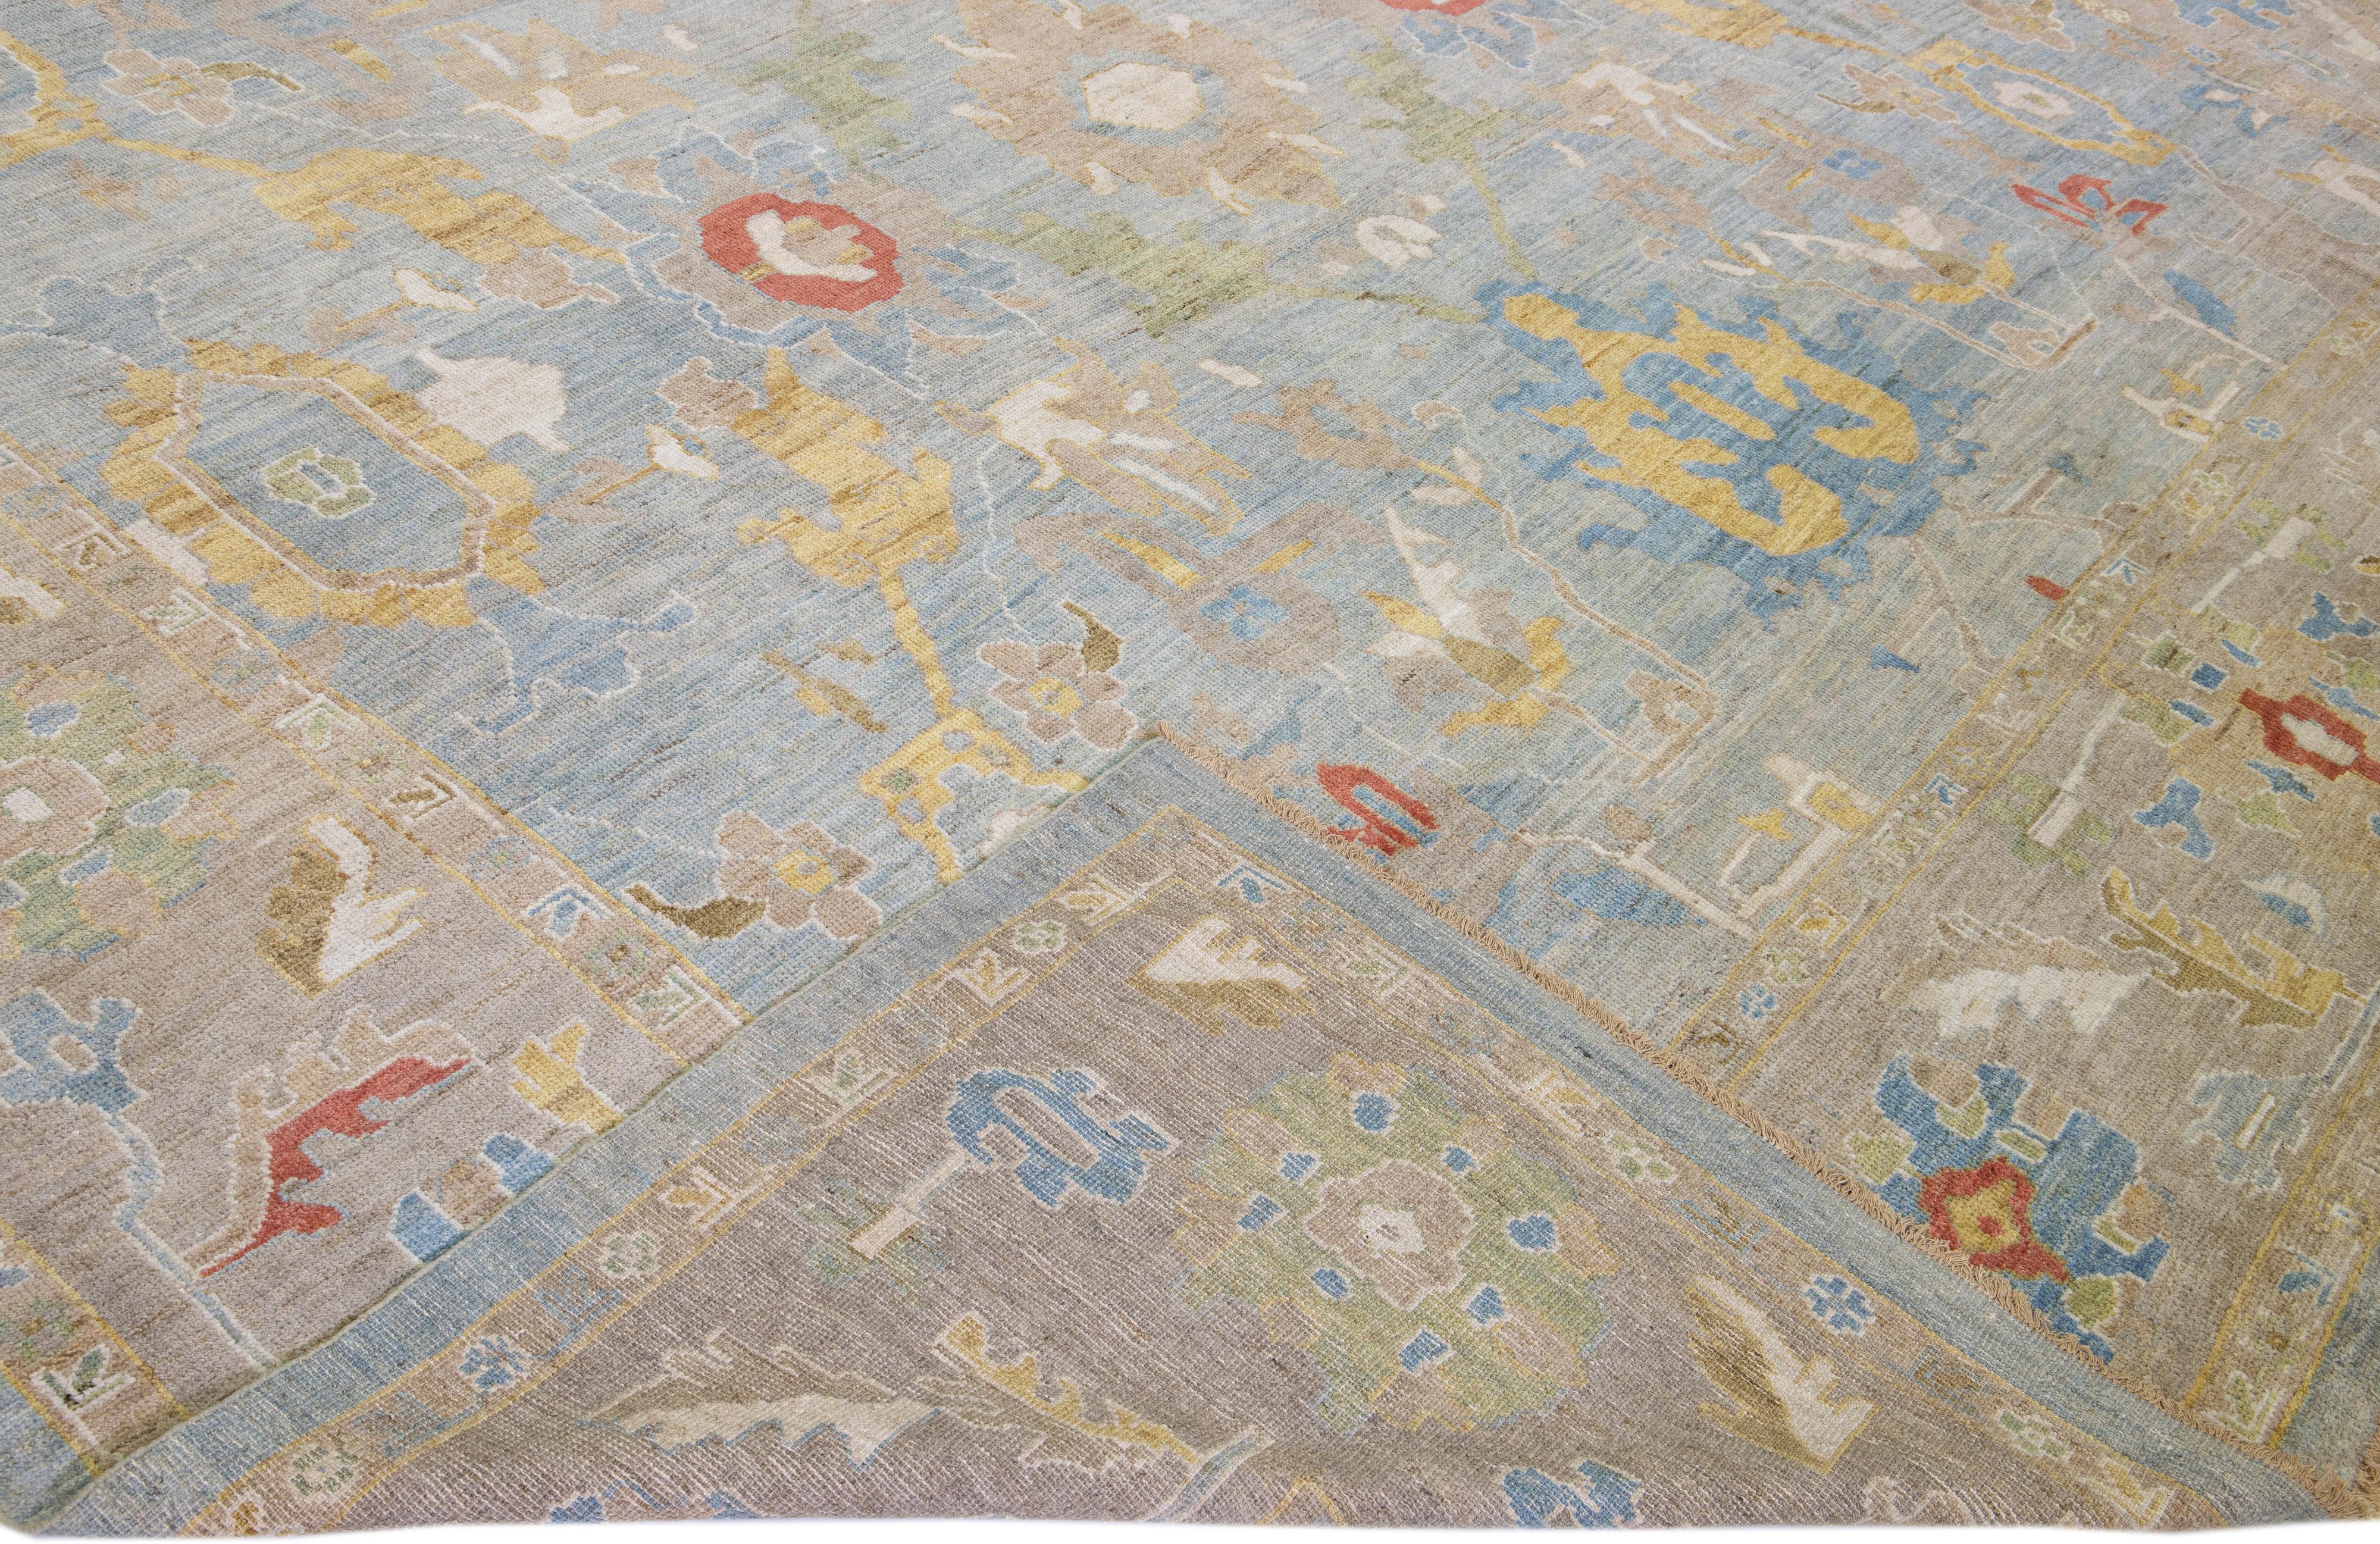 Beautiful modern Sultanabad hand-knotted wool rug with a blue field. This Sultanabad rug has a brown frame and multicolor accents in a gorgeous all-over classic floral pattern design.

This rug measures: 12'11